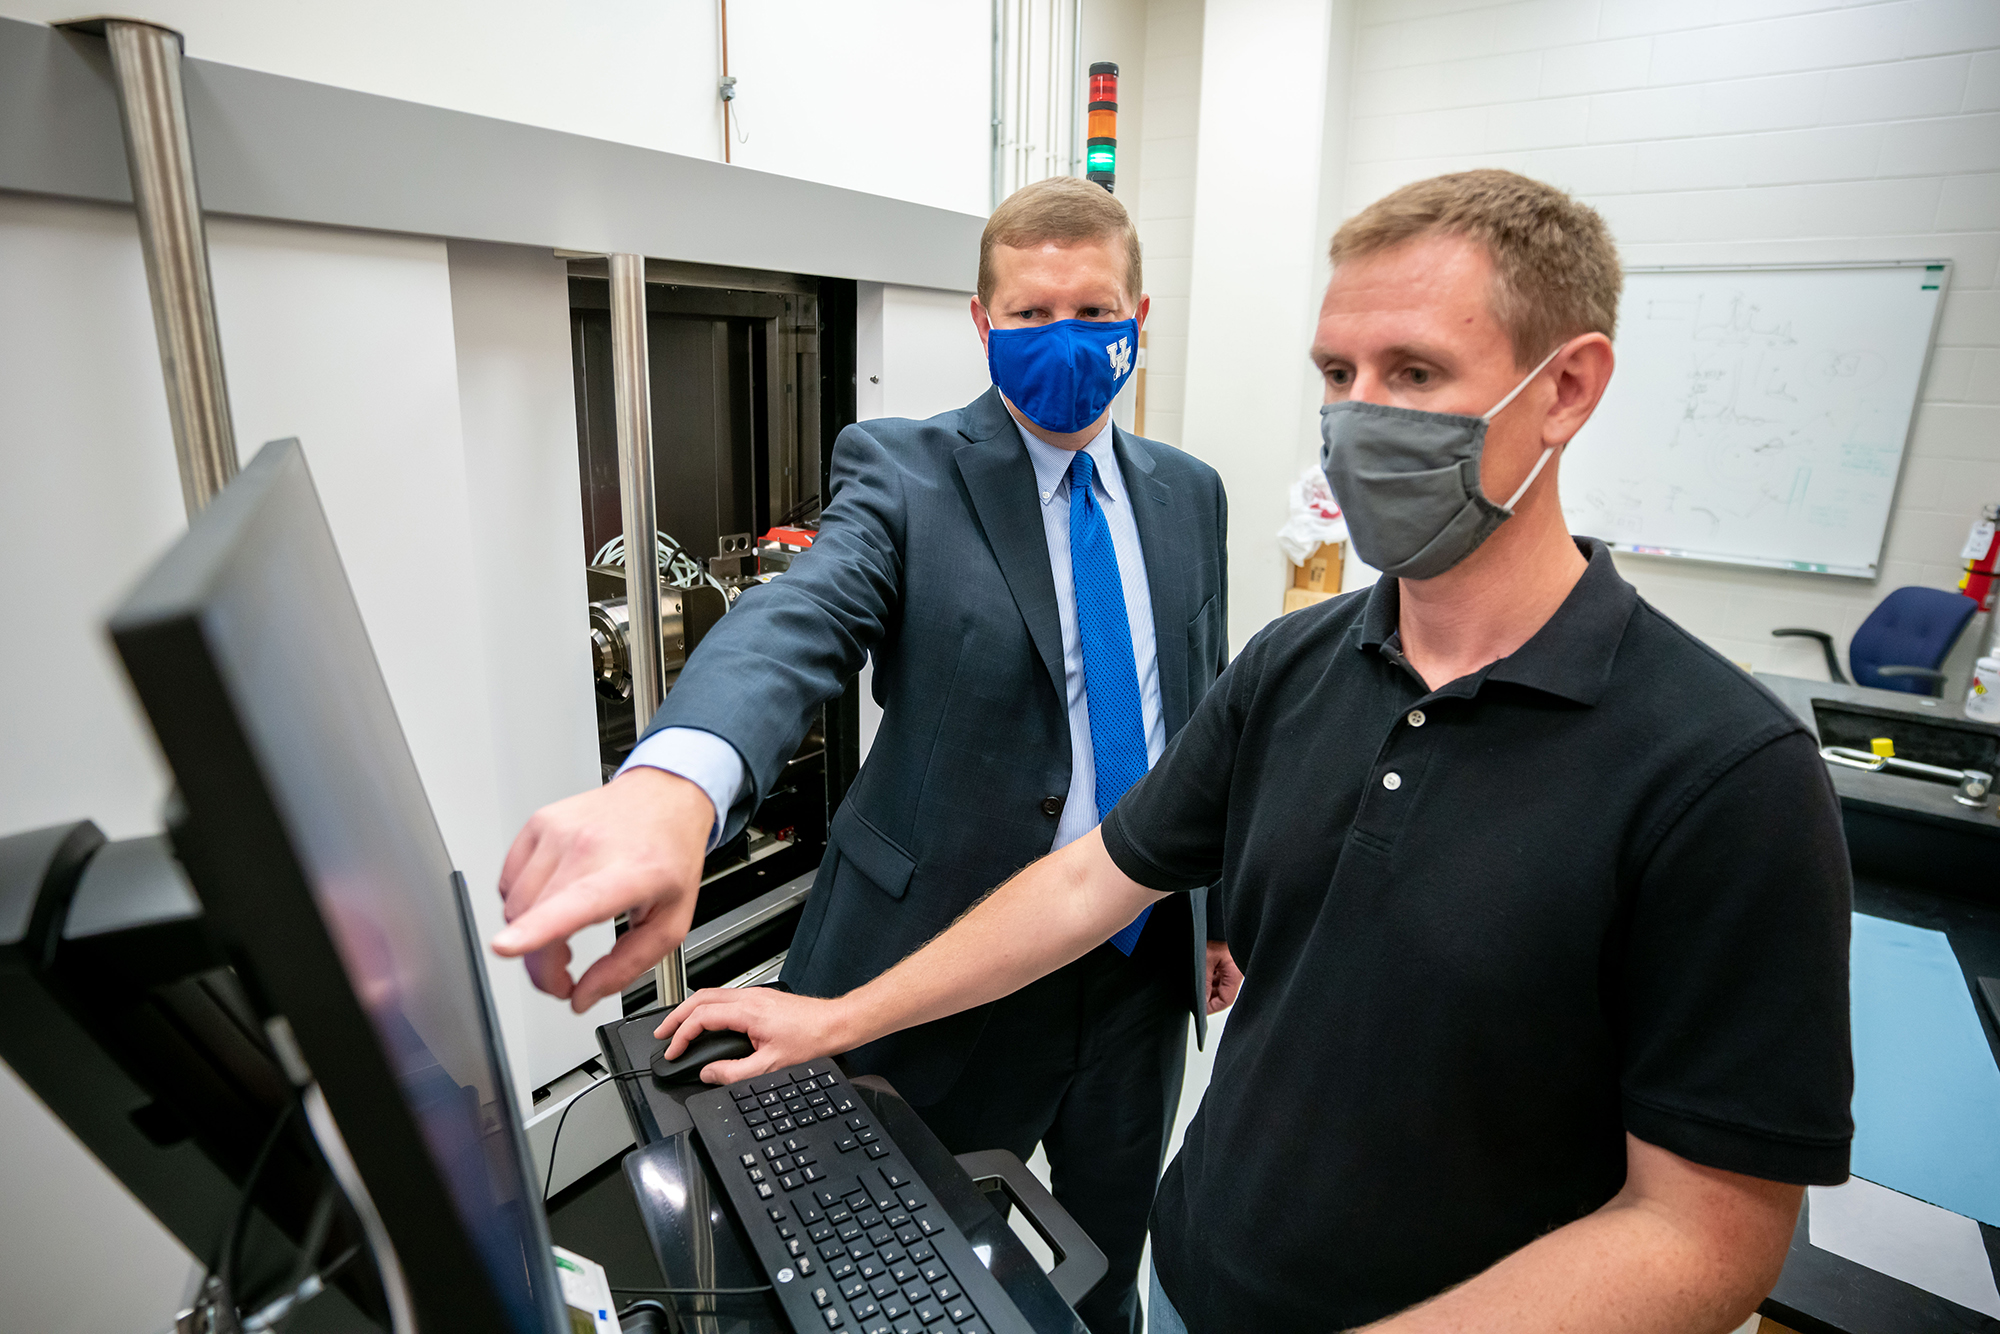 John Balk (left) is the William T. Bryan Professor of Materials Engineering and director of the Electron Microscopy Center (EMC). Pictured here with EMC staff member Nico Briot, Balk is a co-investigator on the NSF grant. Photo Courtesy: UK Research.